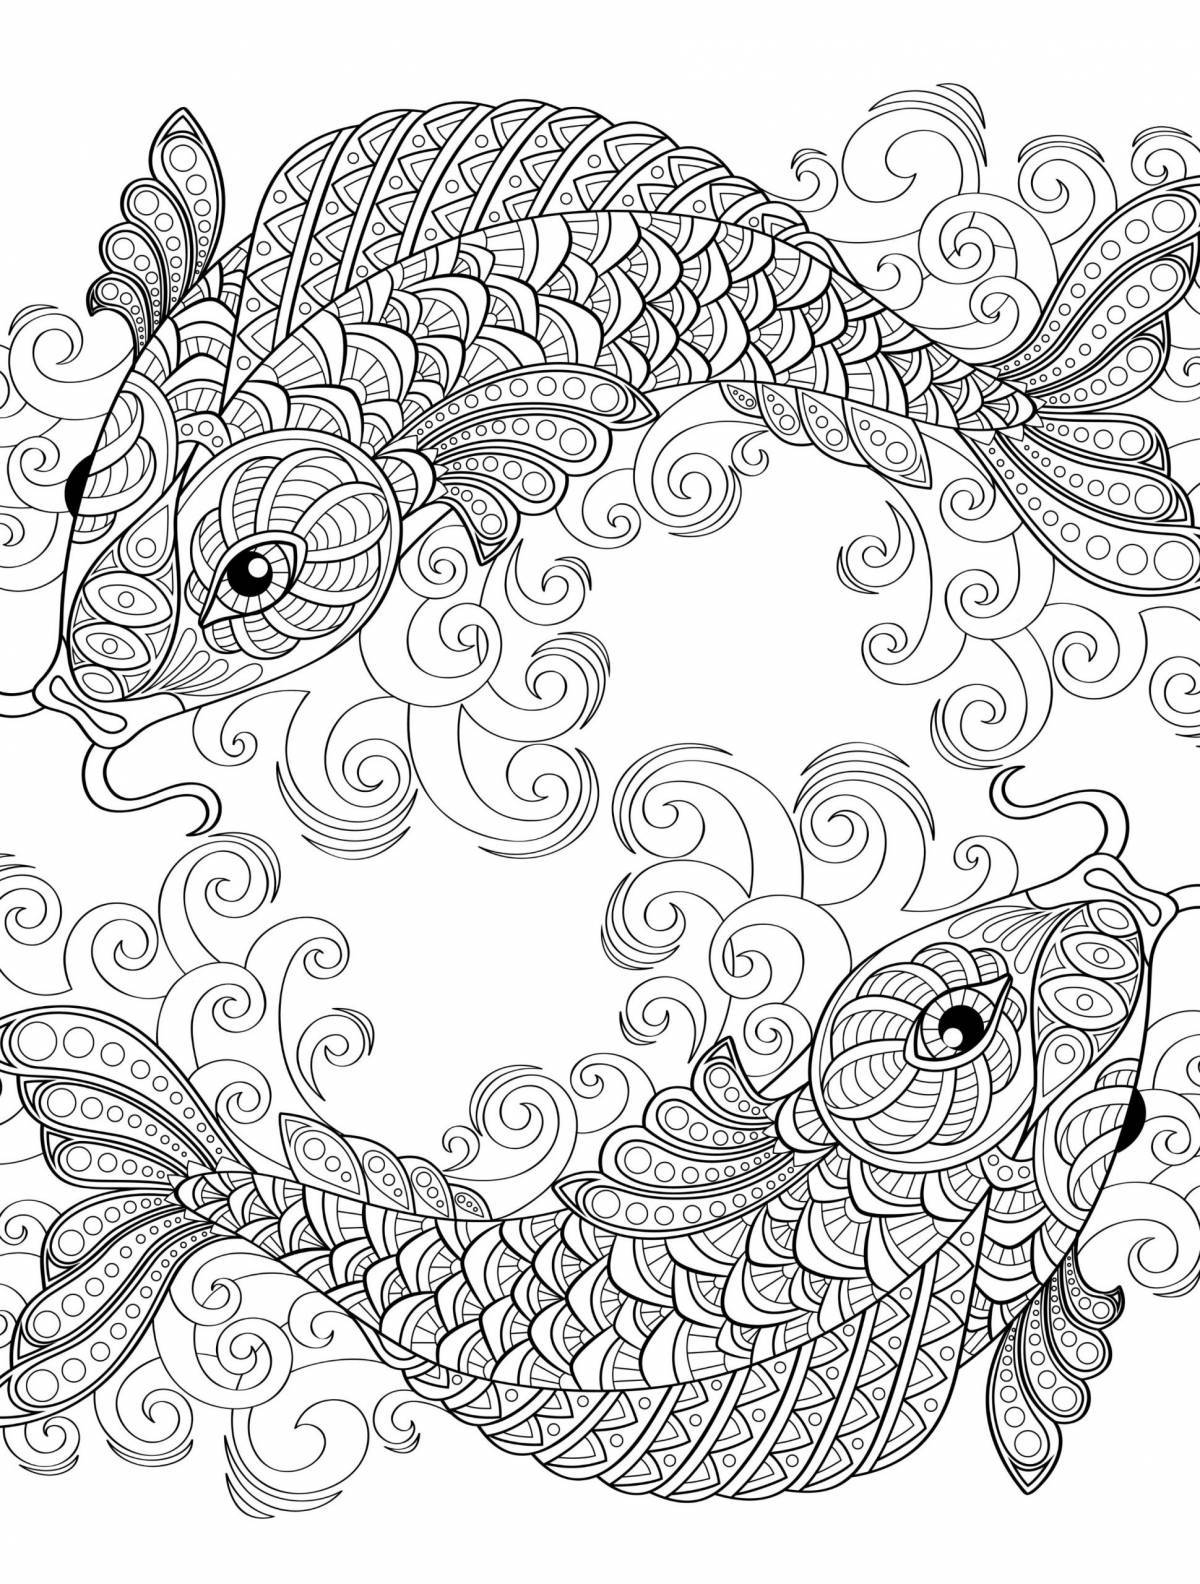 Exciting anti-stress coloring book for adults